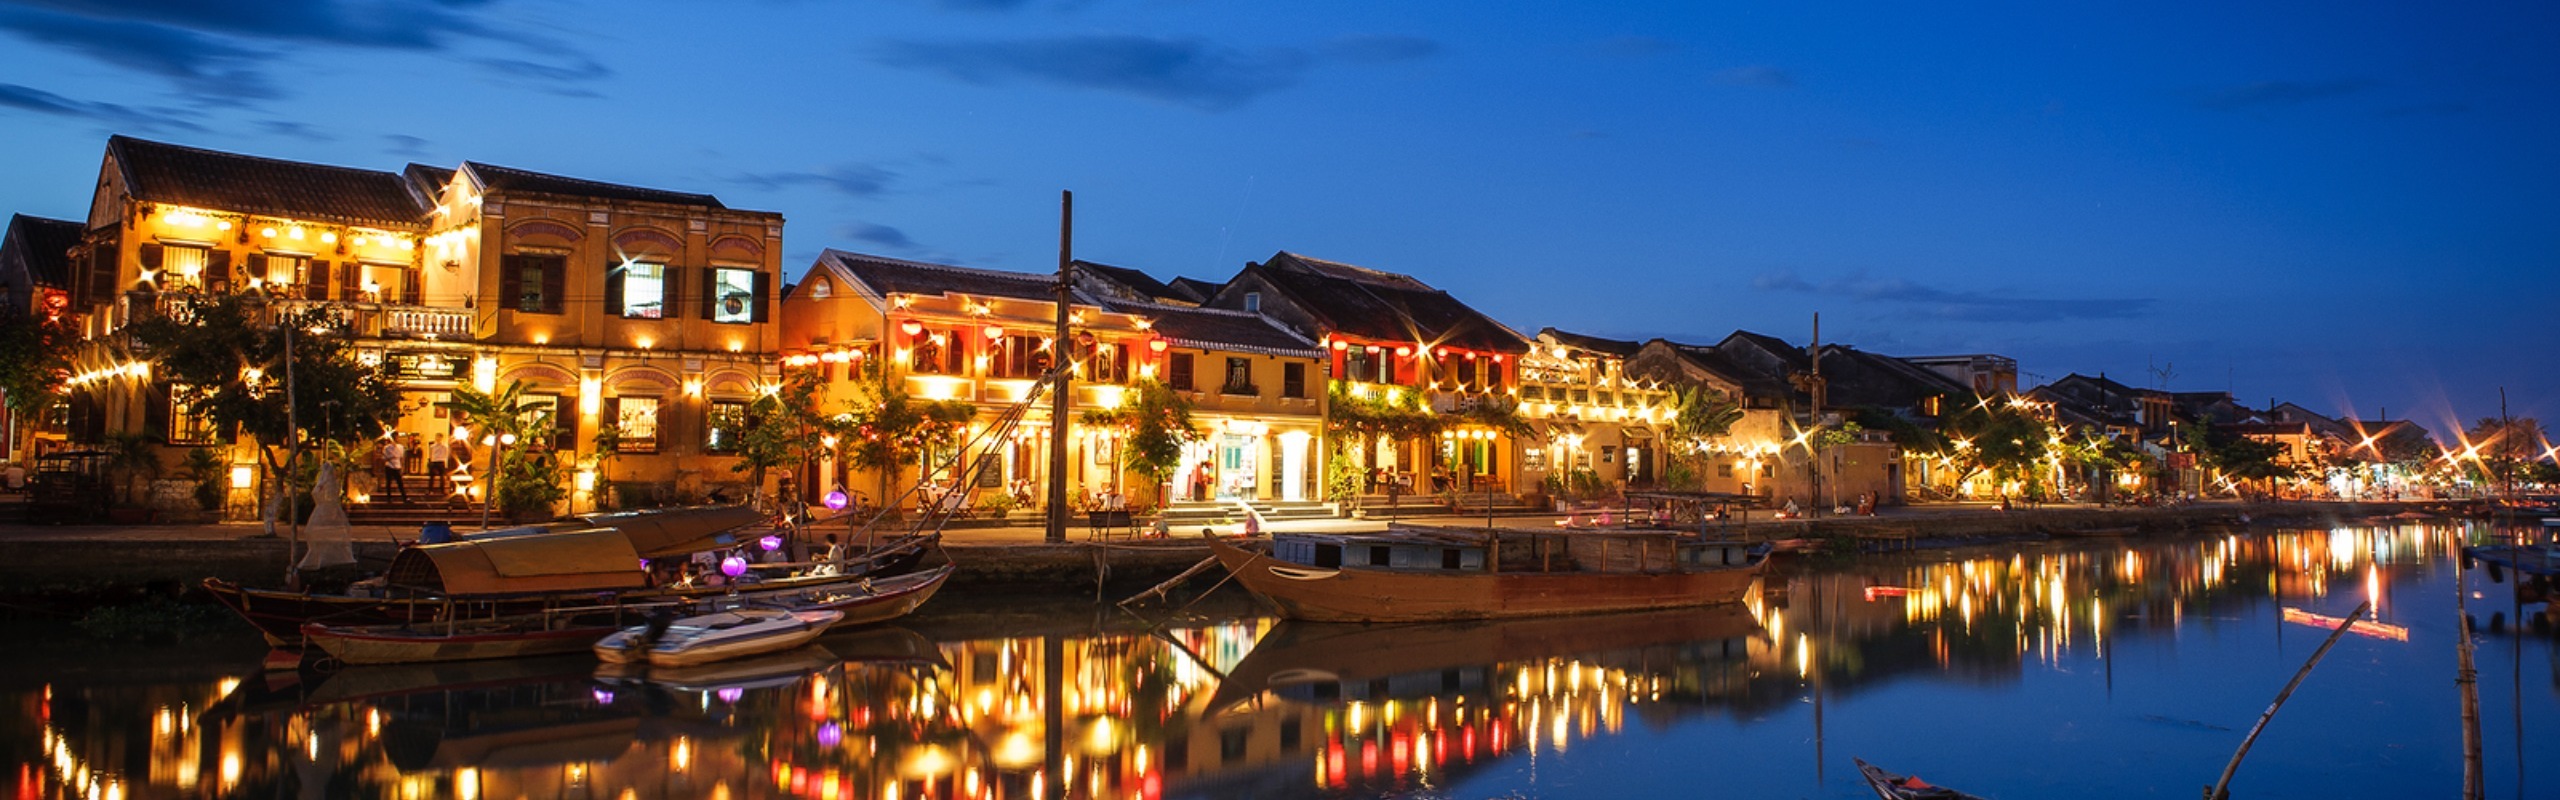 10 Days in Vietnam: 5 Top Itineraries for First-Timers, Couples, and Families